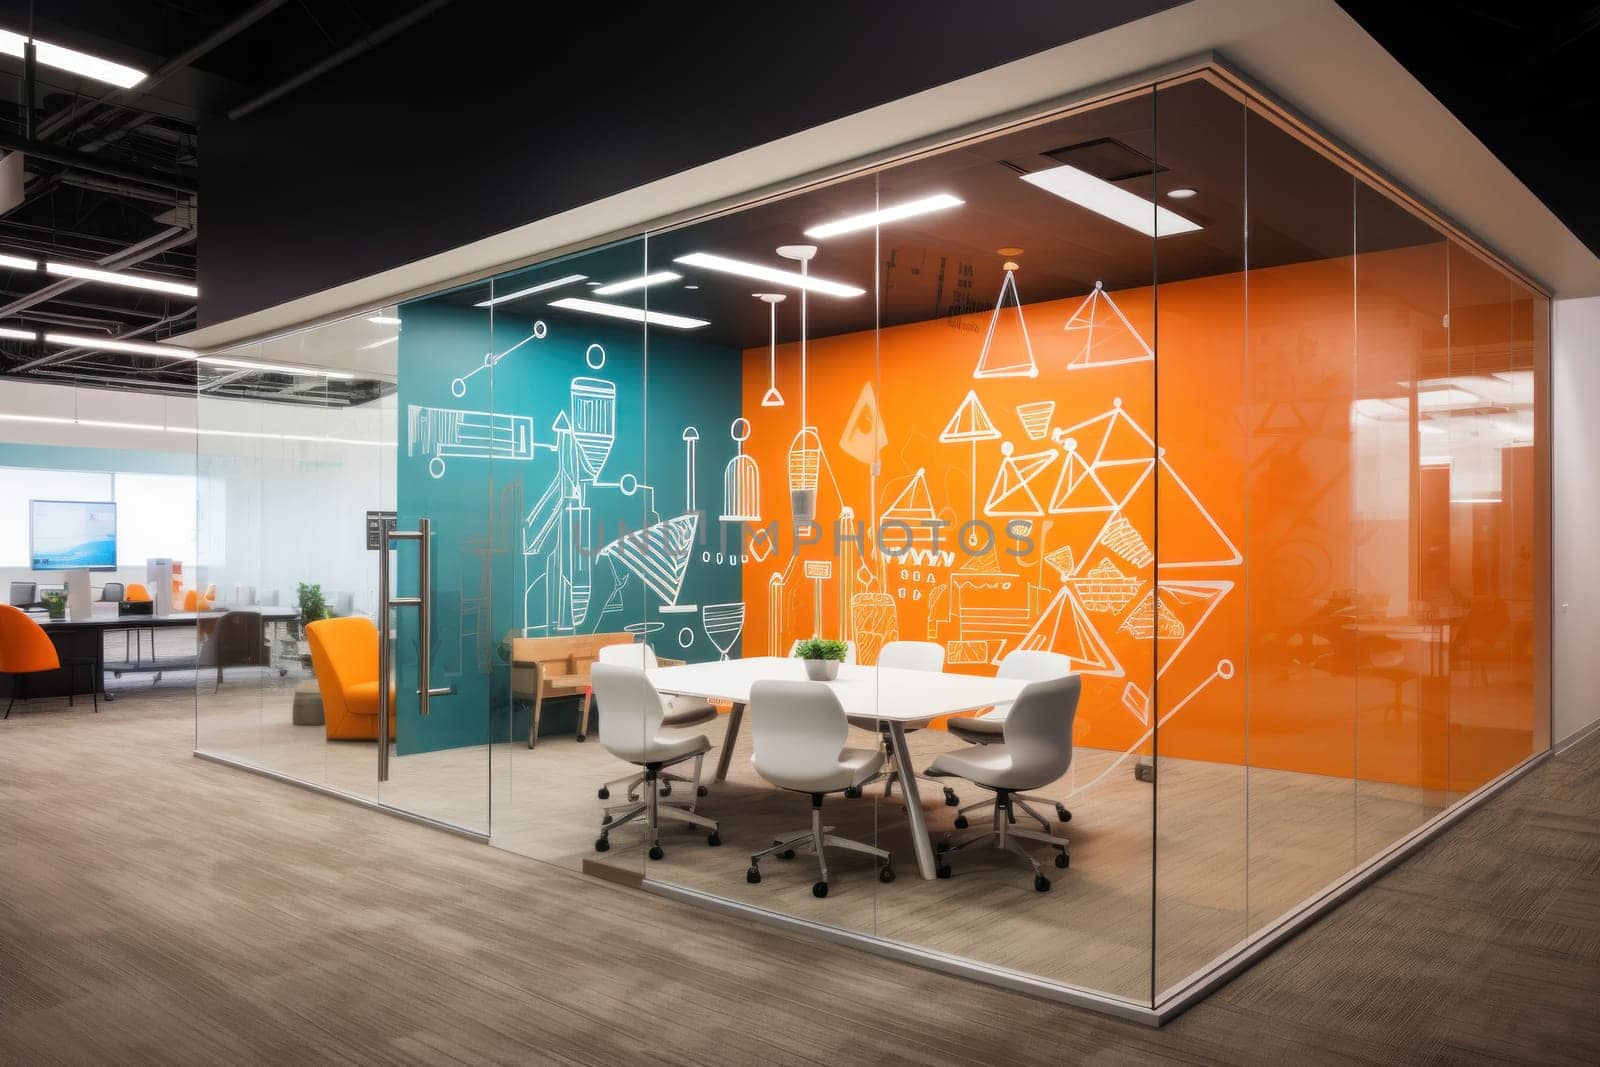 Photo of a creative office design with writable walls.